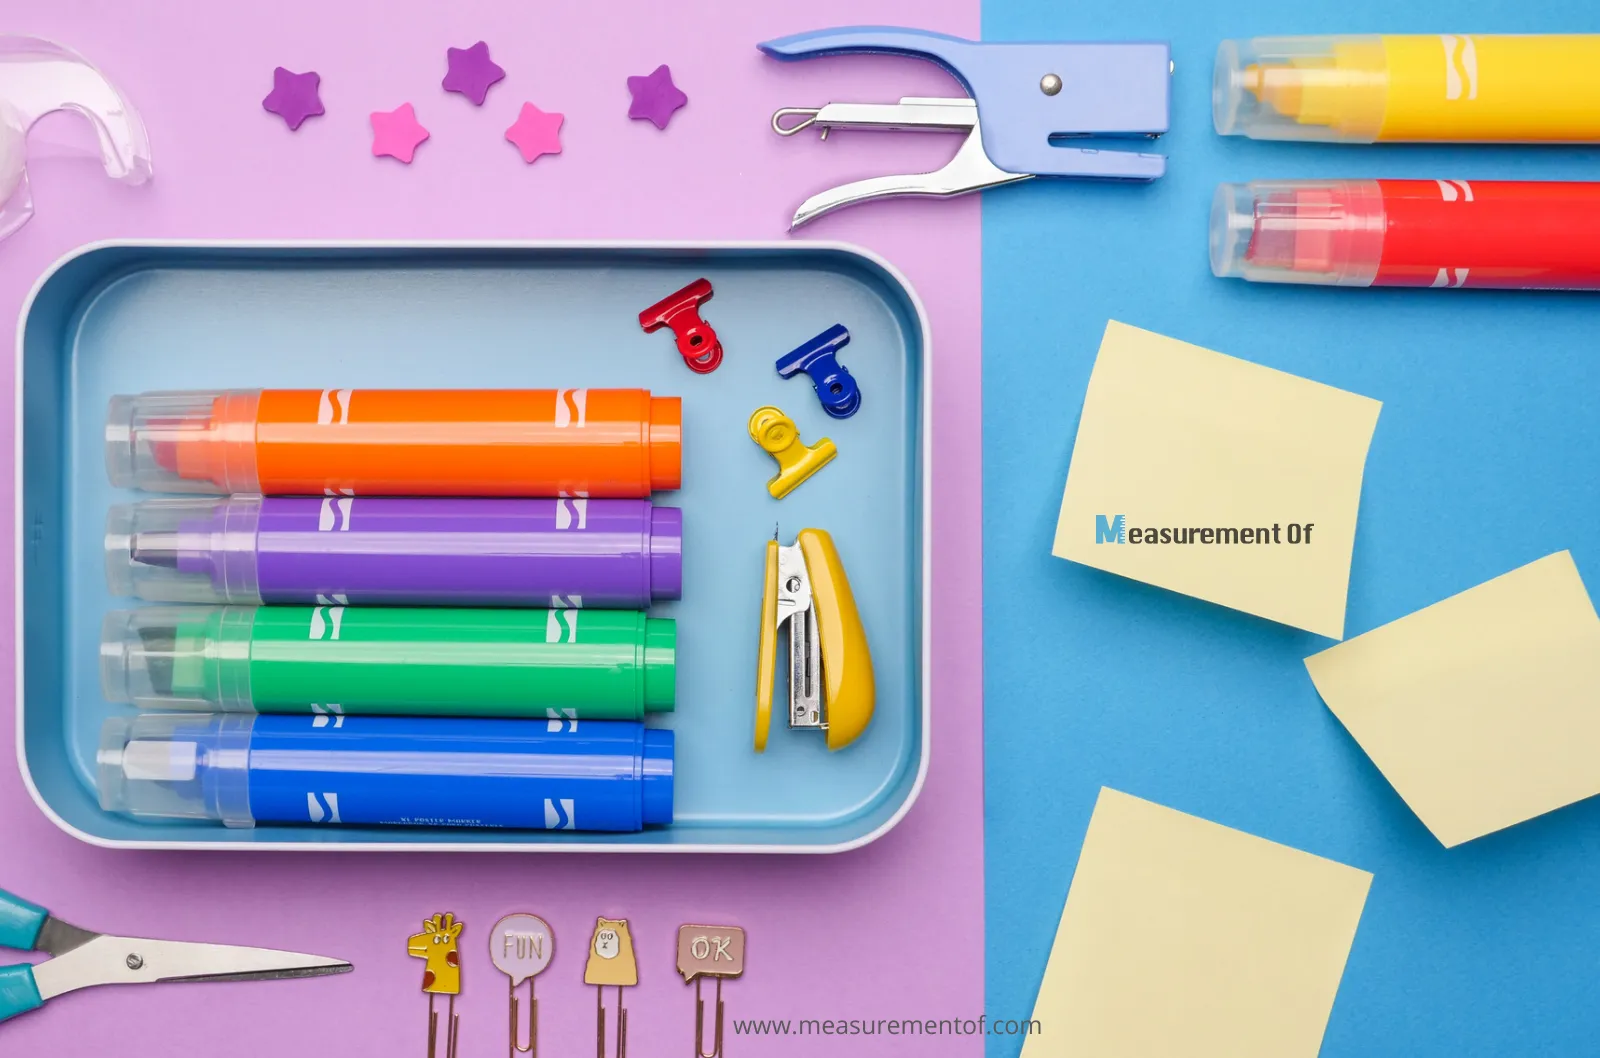 Highlighters, post it note papers, scissors and other stationery items on a surface